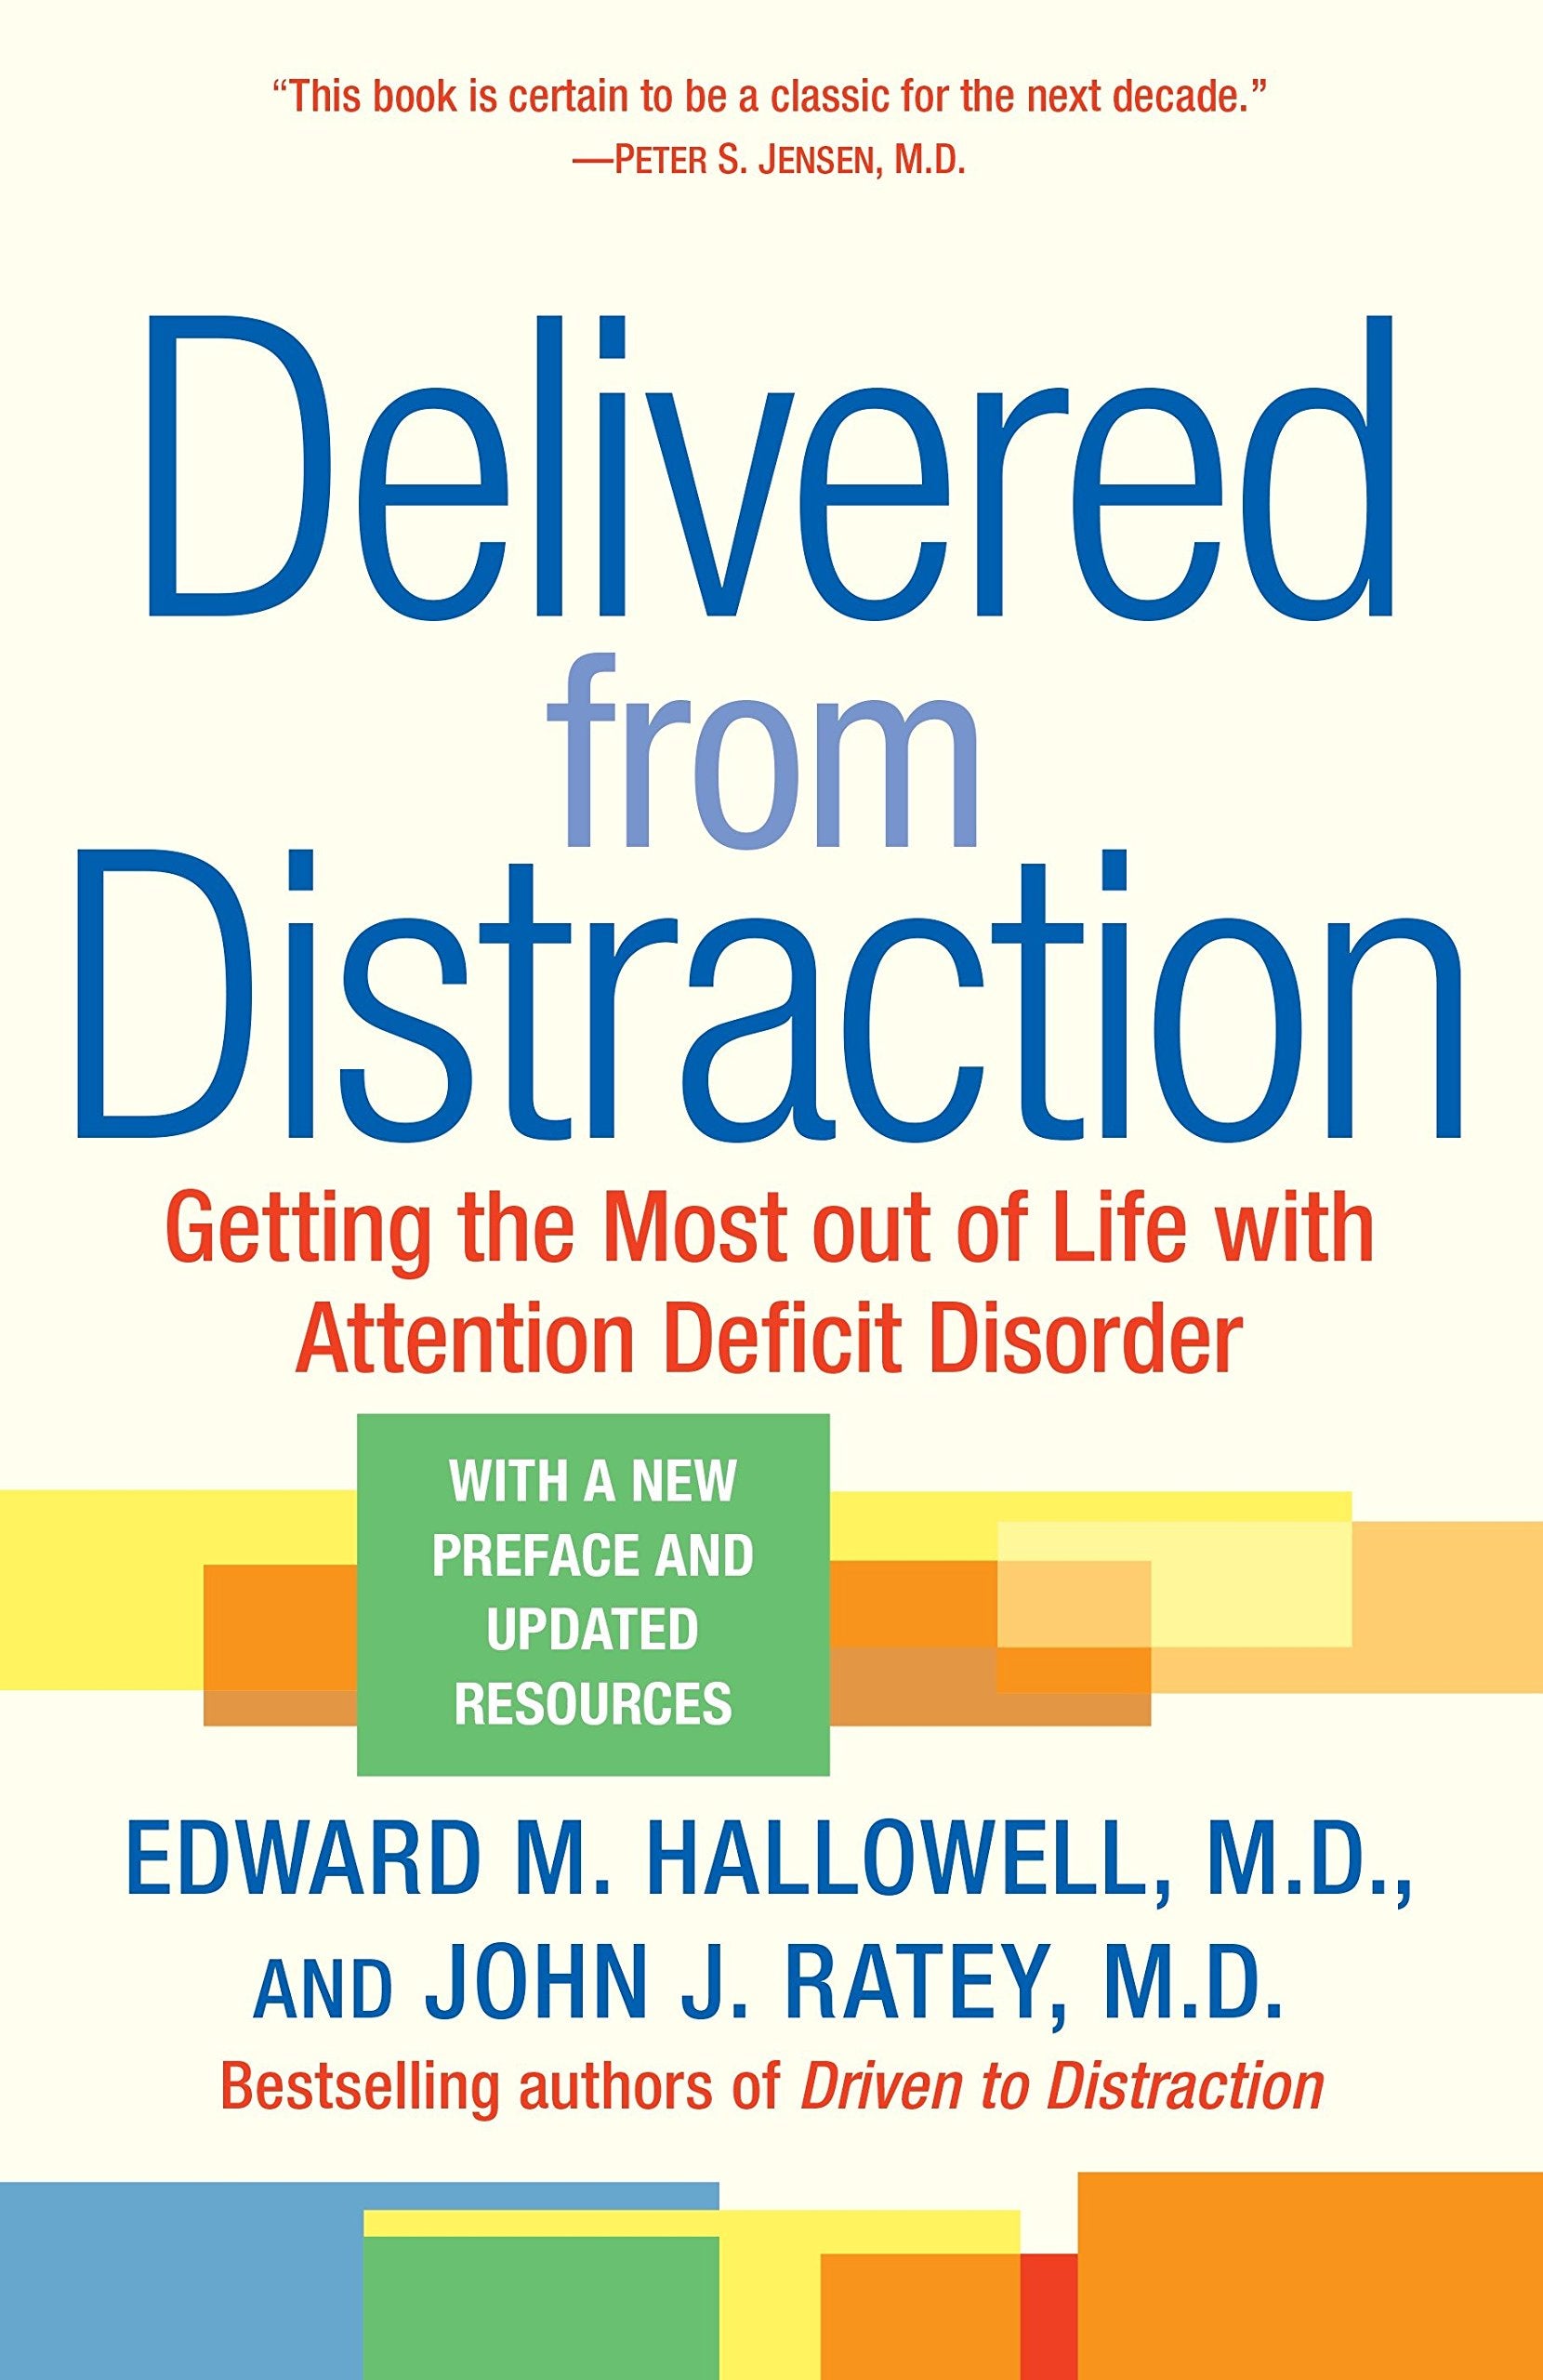 Livre ISBN 0345442318 Delivered from Distraction: Getting the Most out of Life with Attention Deficit Disorder (Edward M. Hallowell)